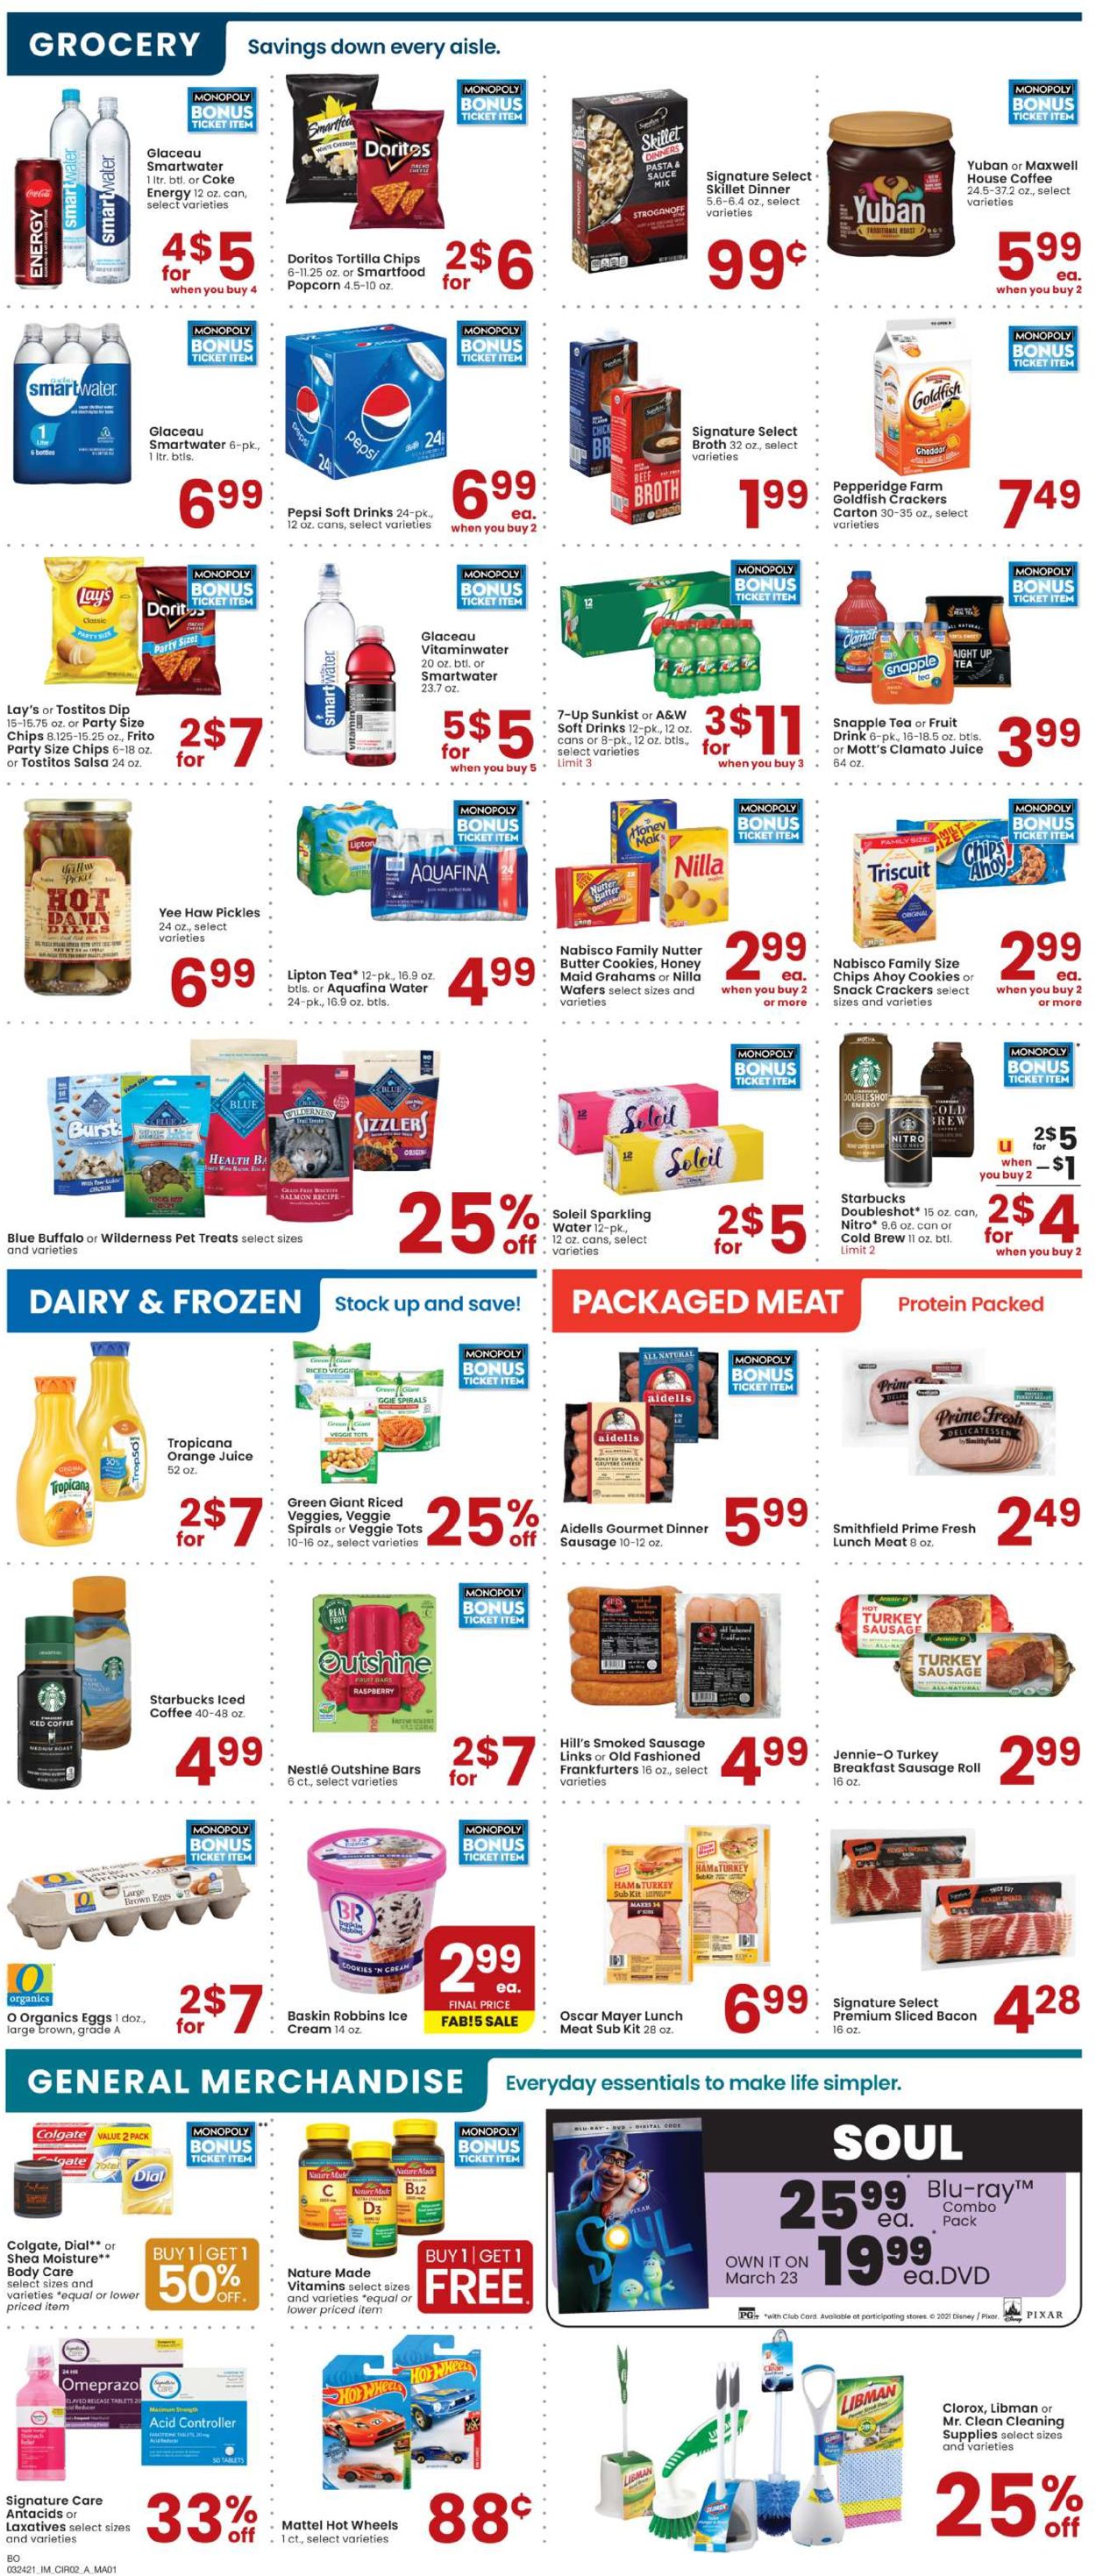 Albertsons Current weekly ad 03/24 - 03/30/2021 [2] - frequent-ads.com